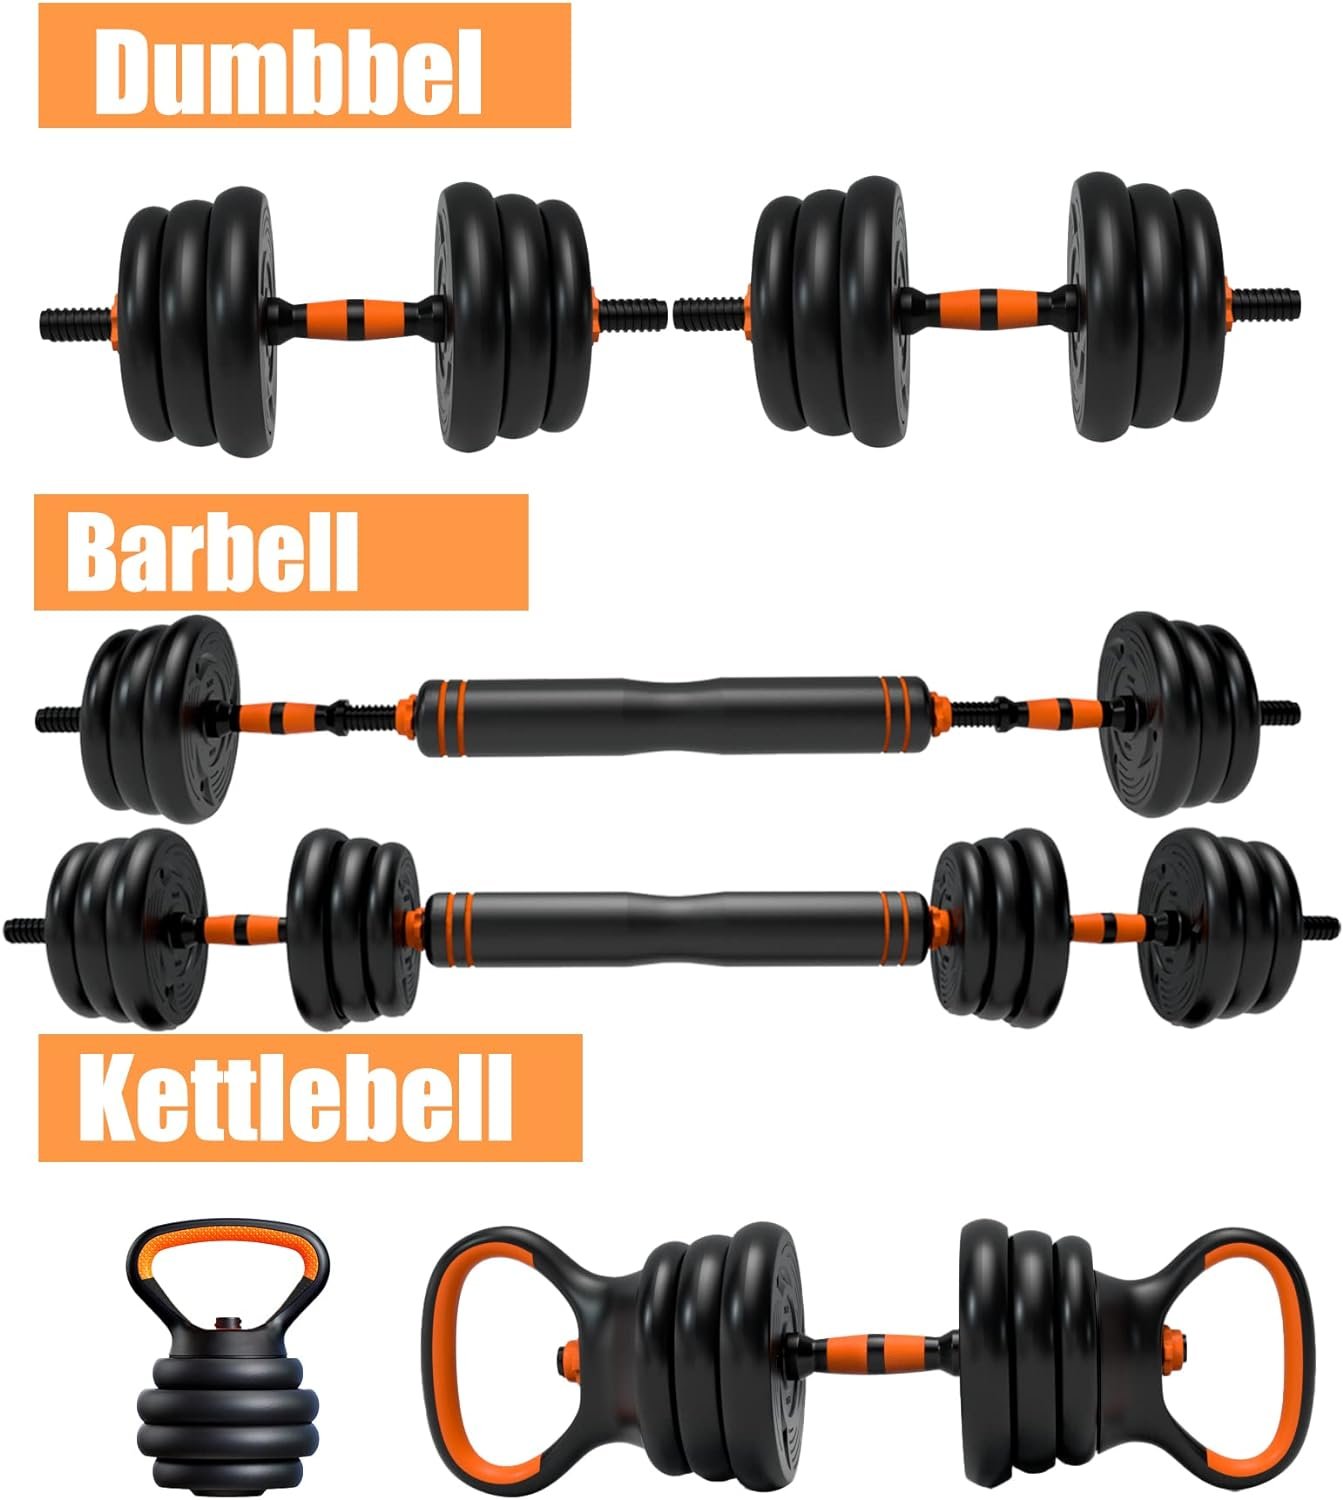 CANMALCHI Adjustable Dumbbells Weights Set 20lbs/33lbs/44lbs for Indoor Workout Dumbbell Weight Barbell Perfect for Bodybuilding Fitness Lifting Training Home Gym Equipment